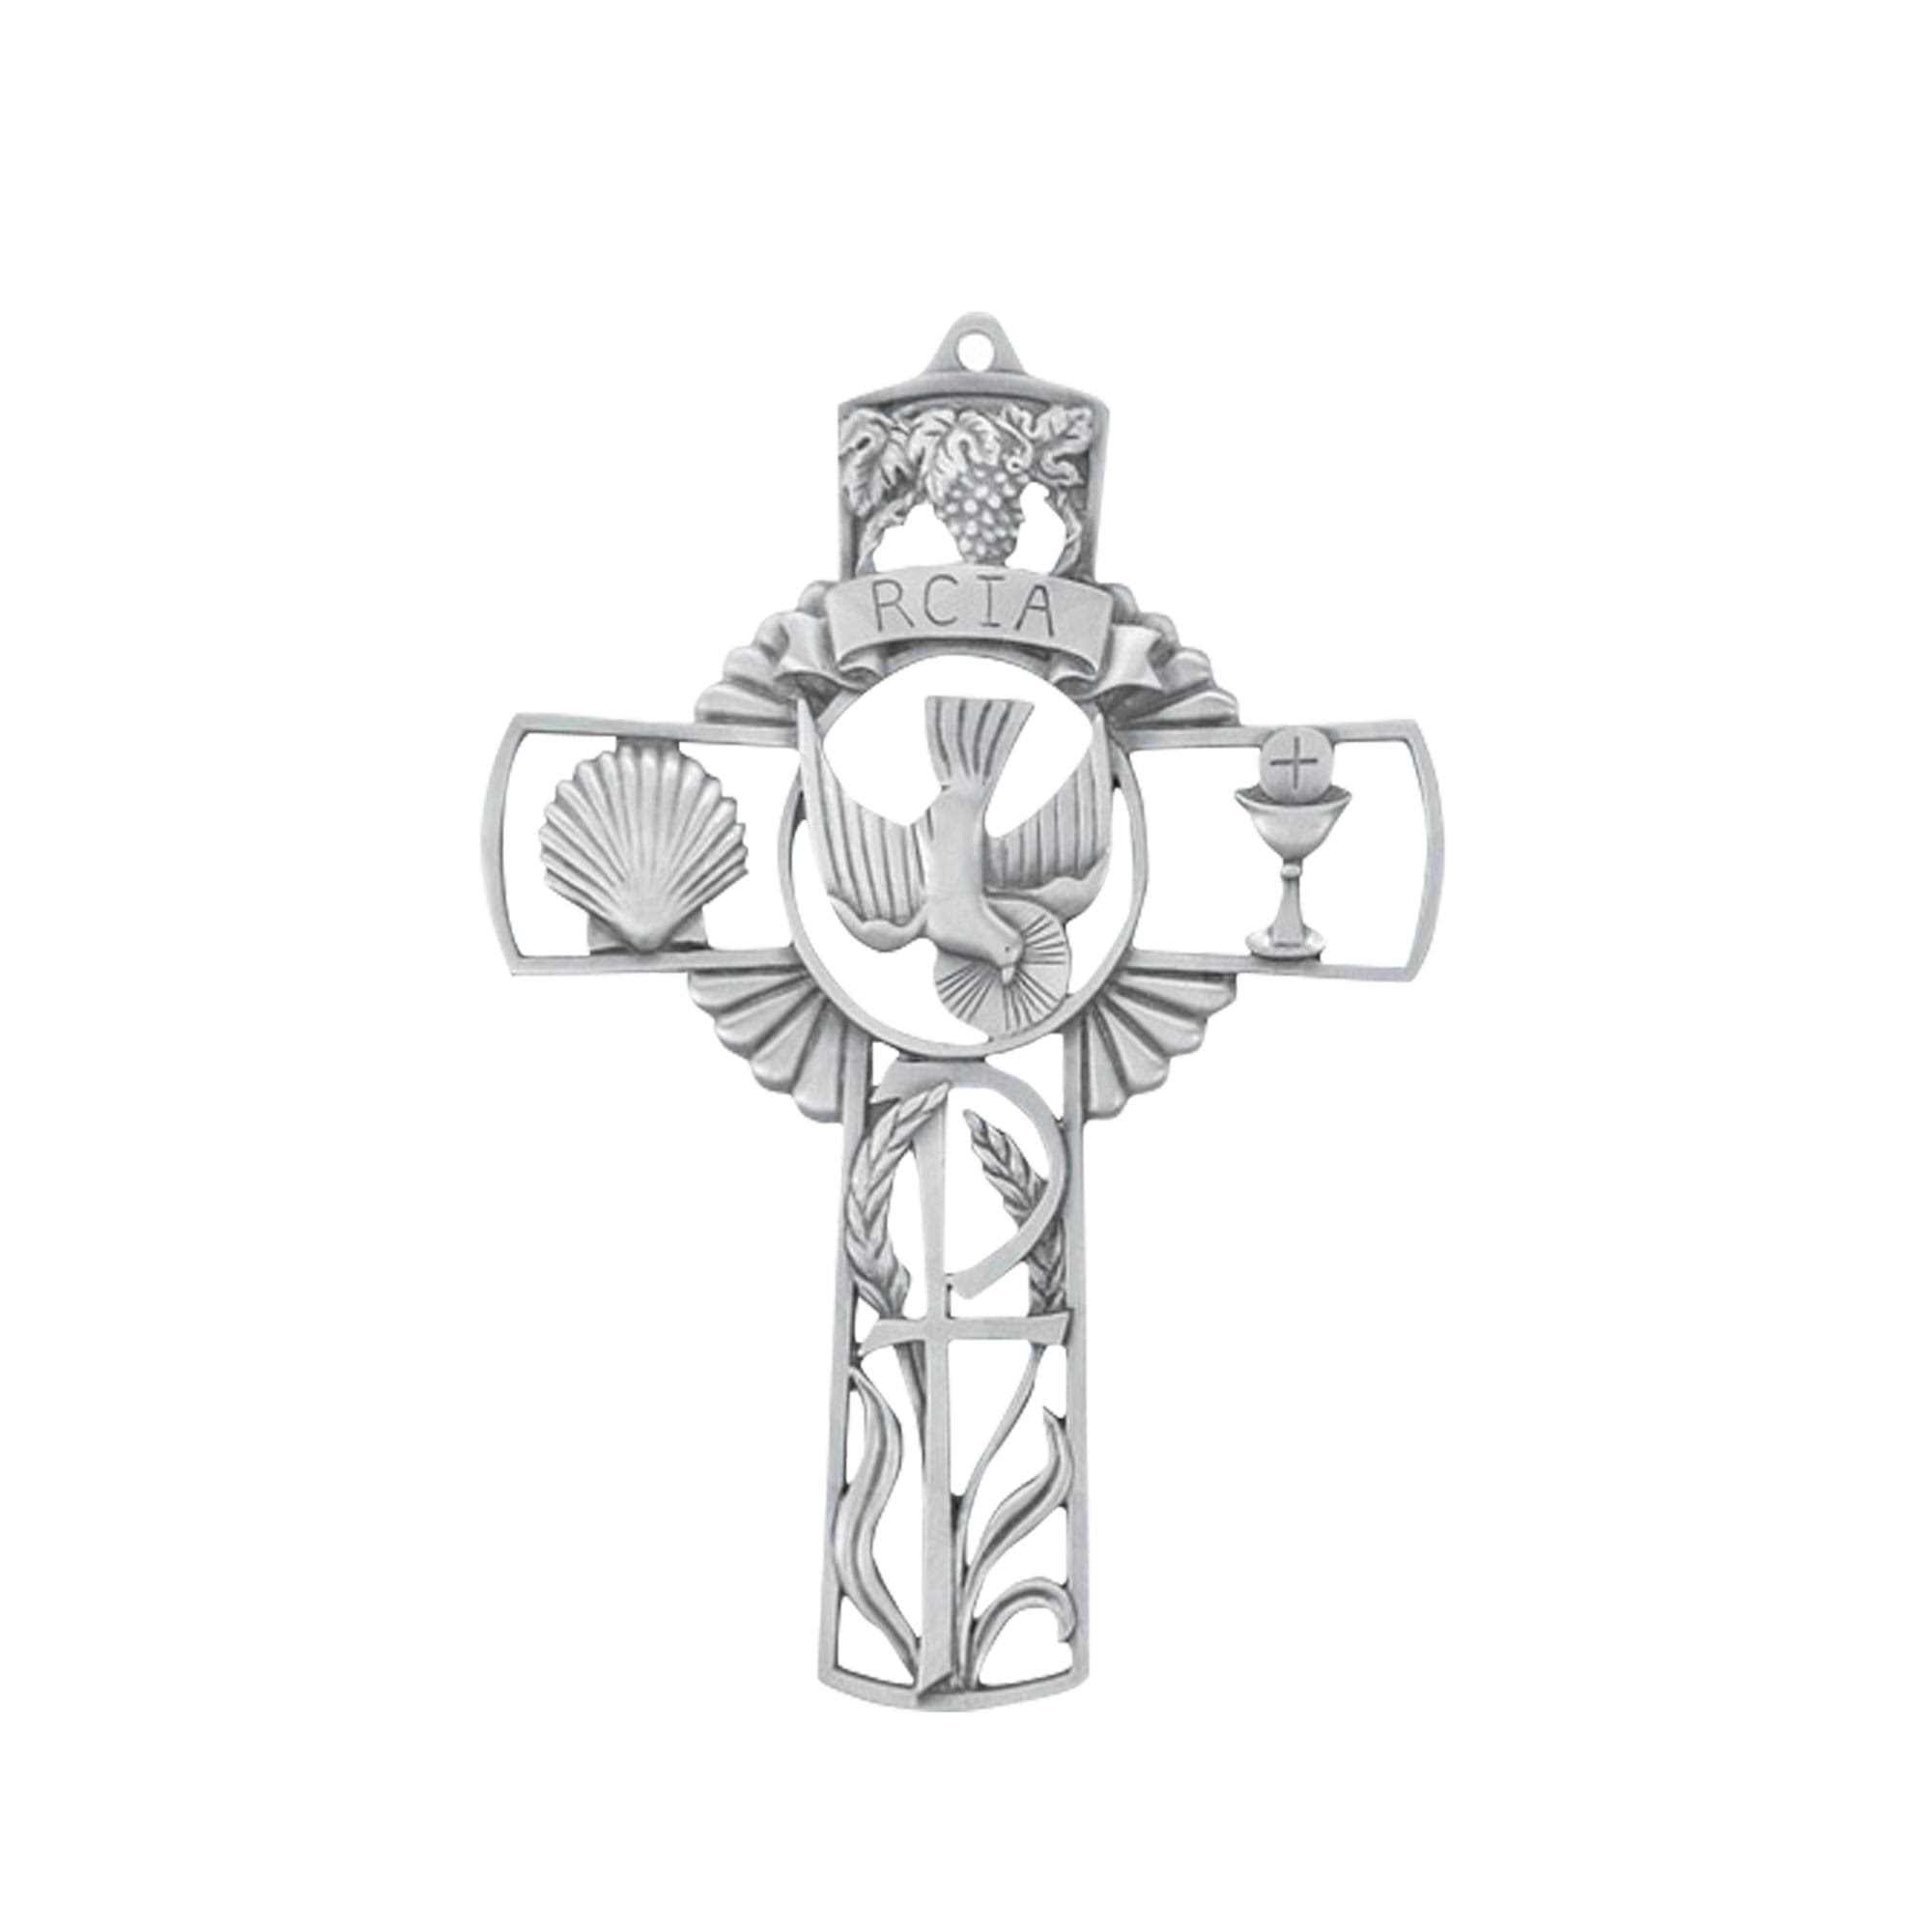 Pewter RCIA Wall Cross 5